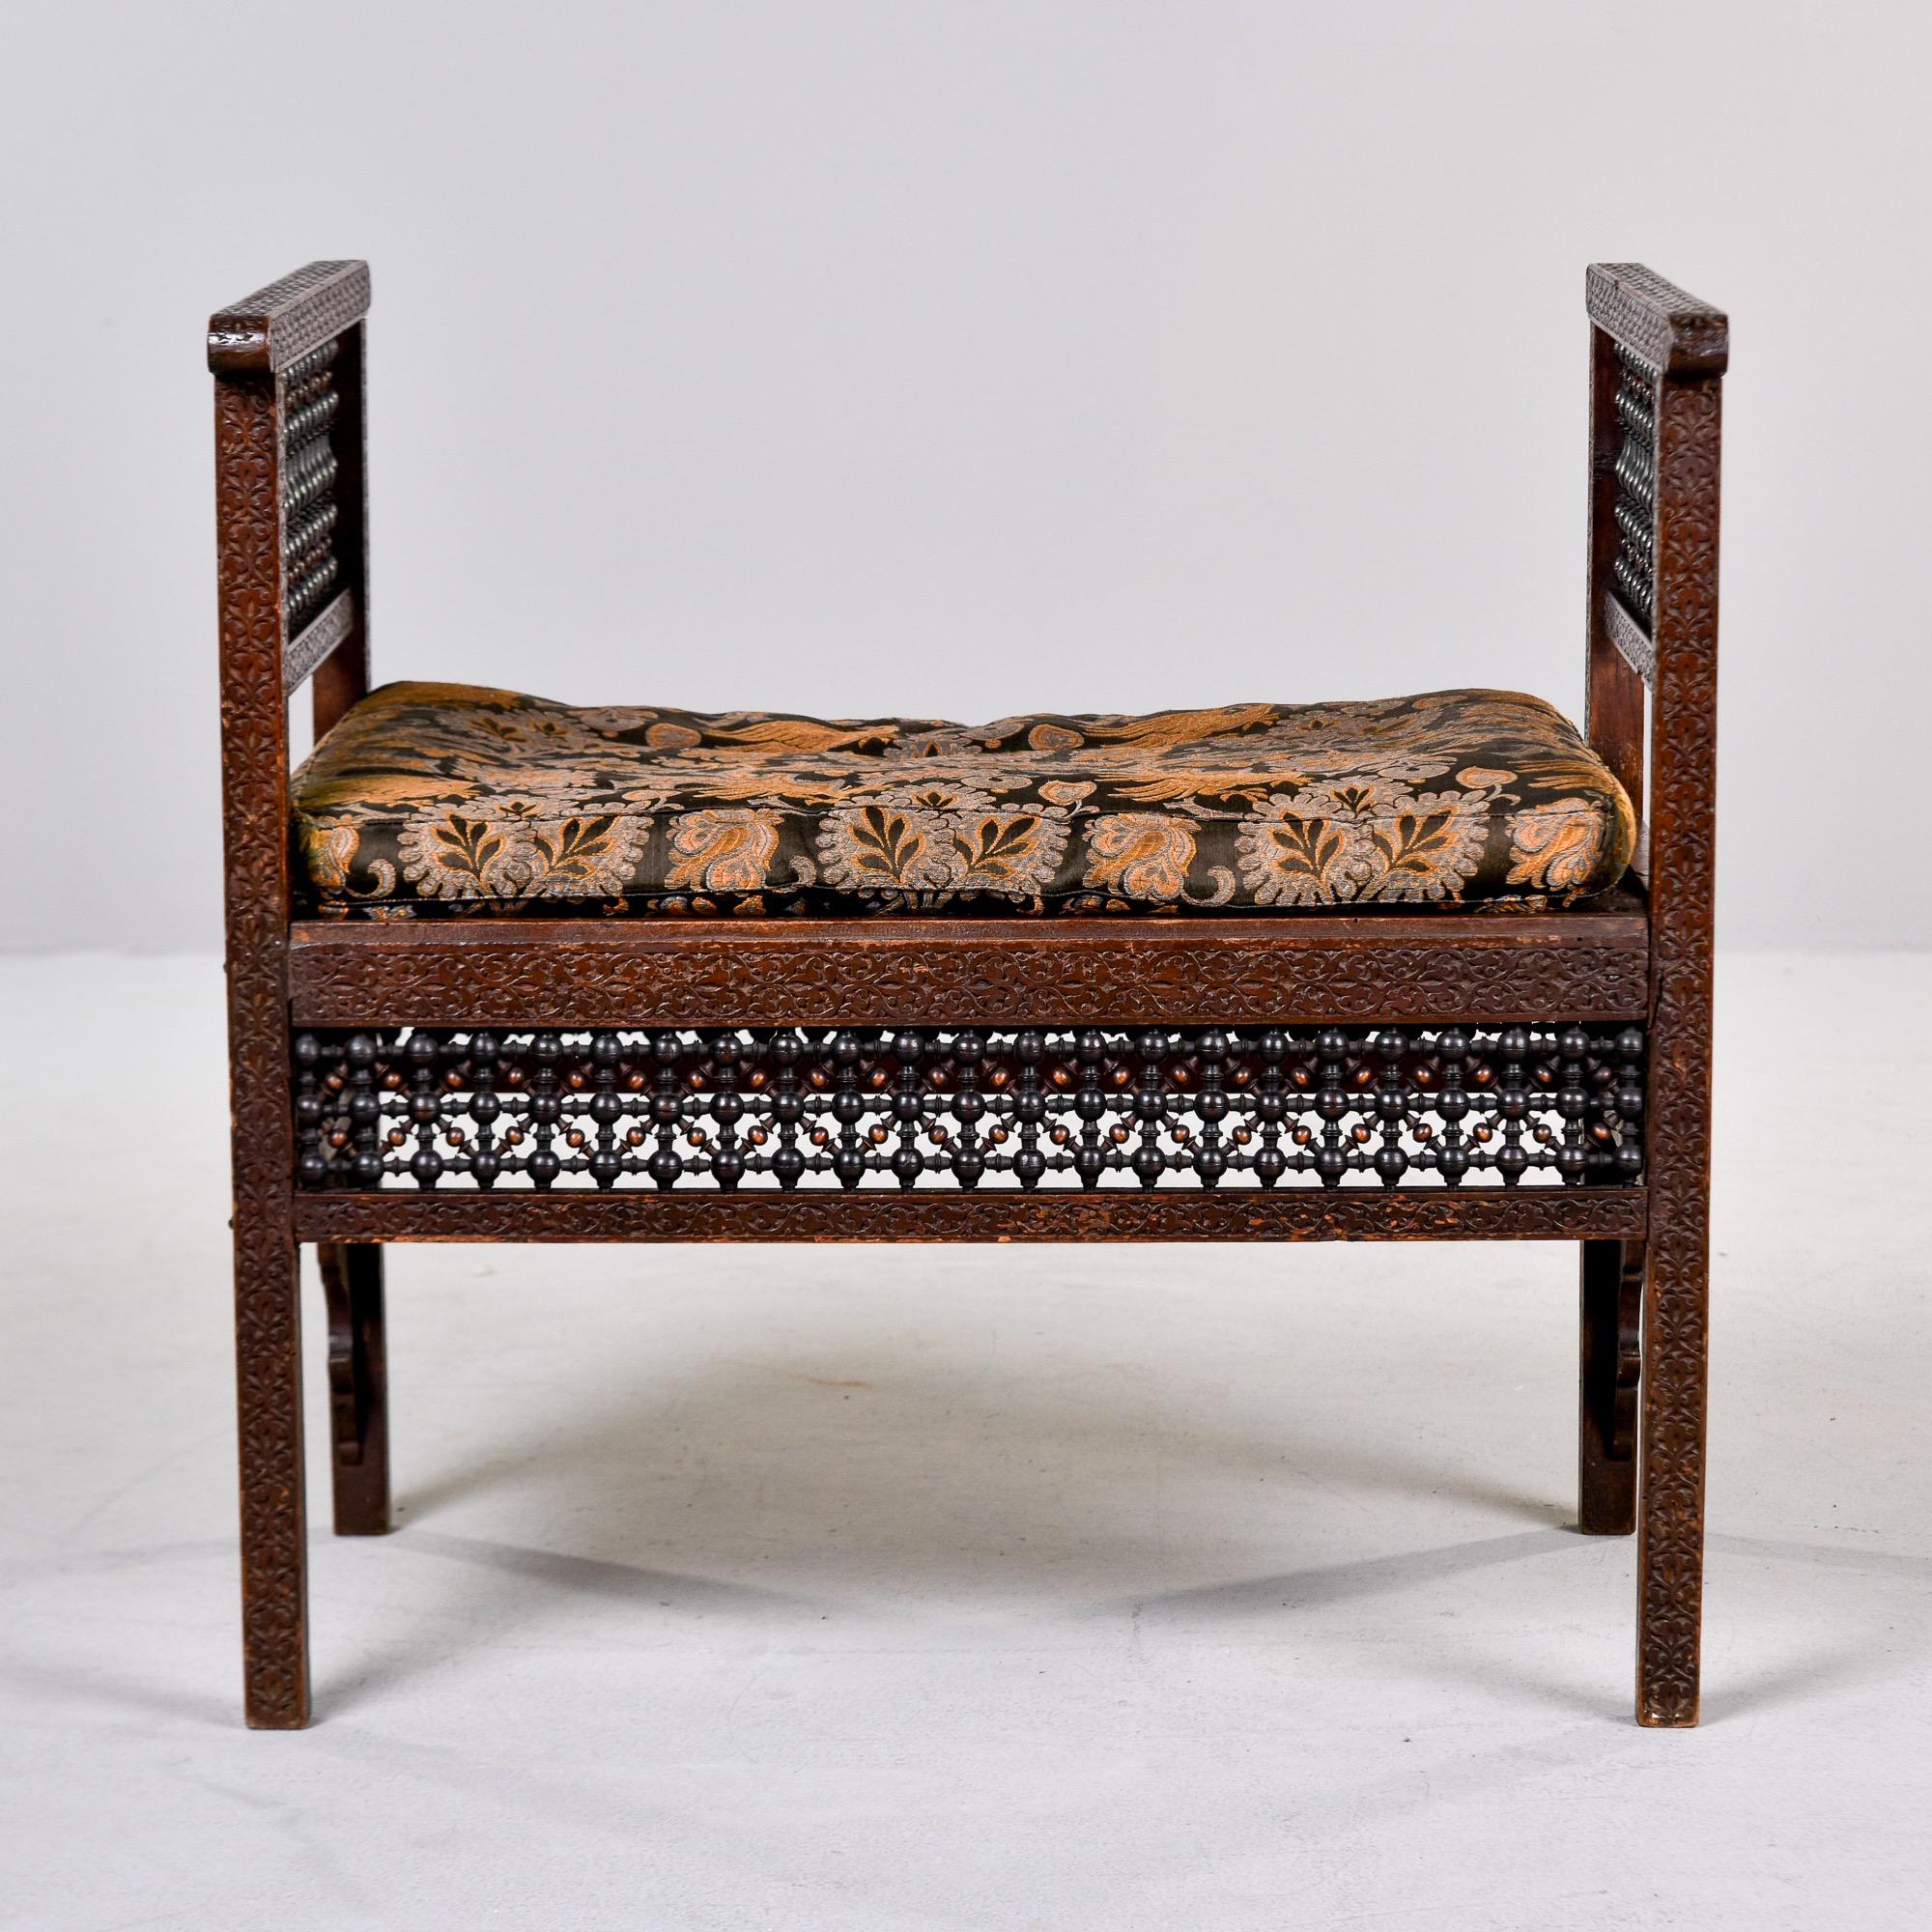 Turkish Early 20th C Heavily Carved Teak Moorish Bench With Tall Sides and Cushion For Sale